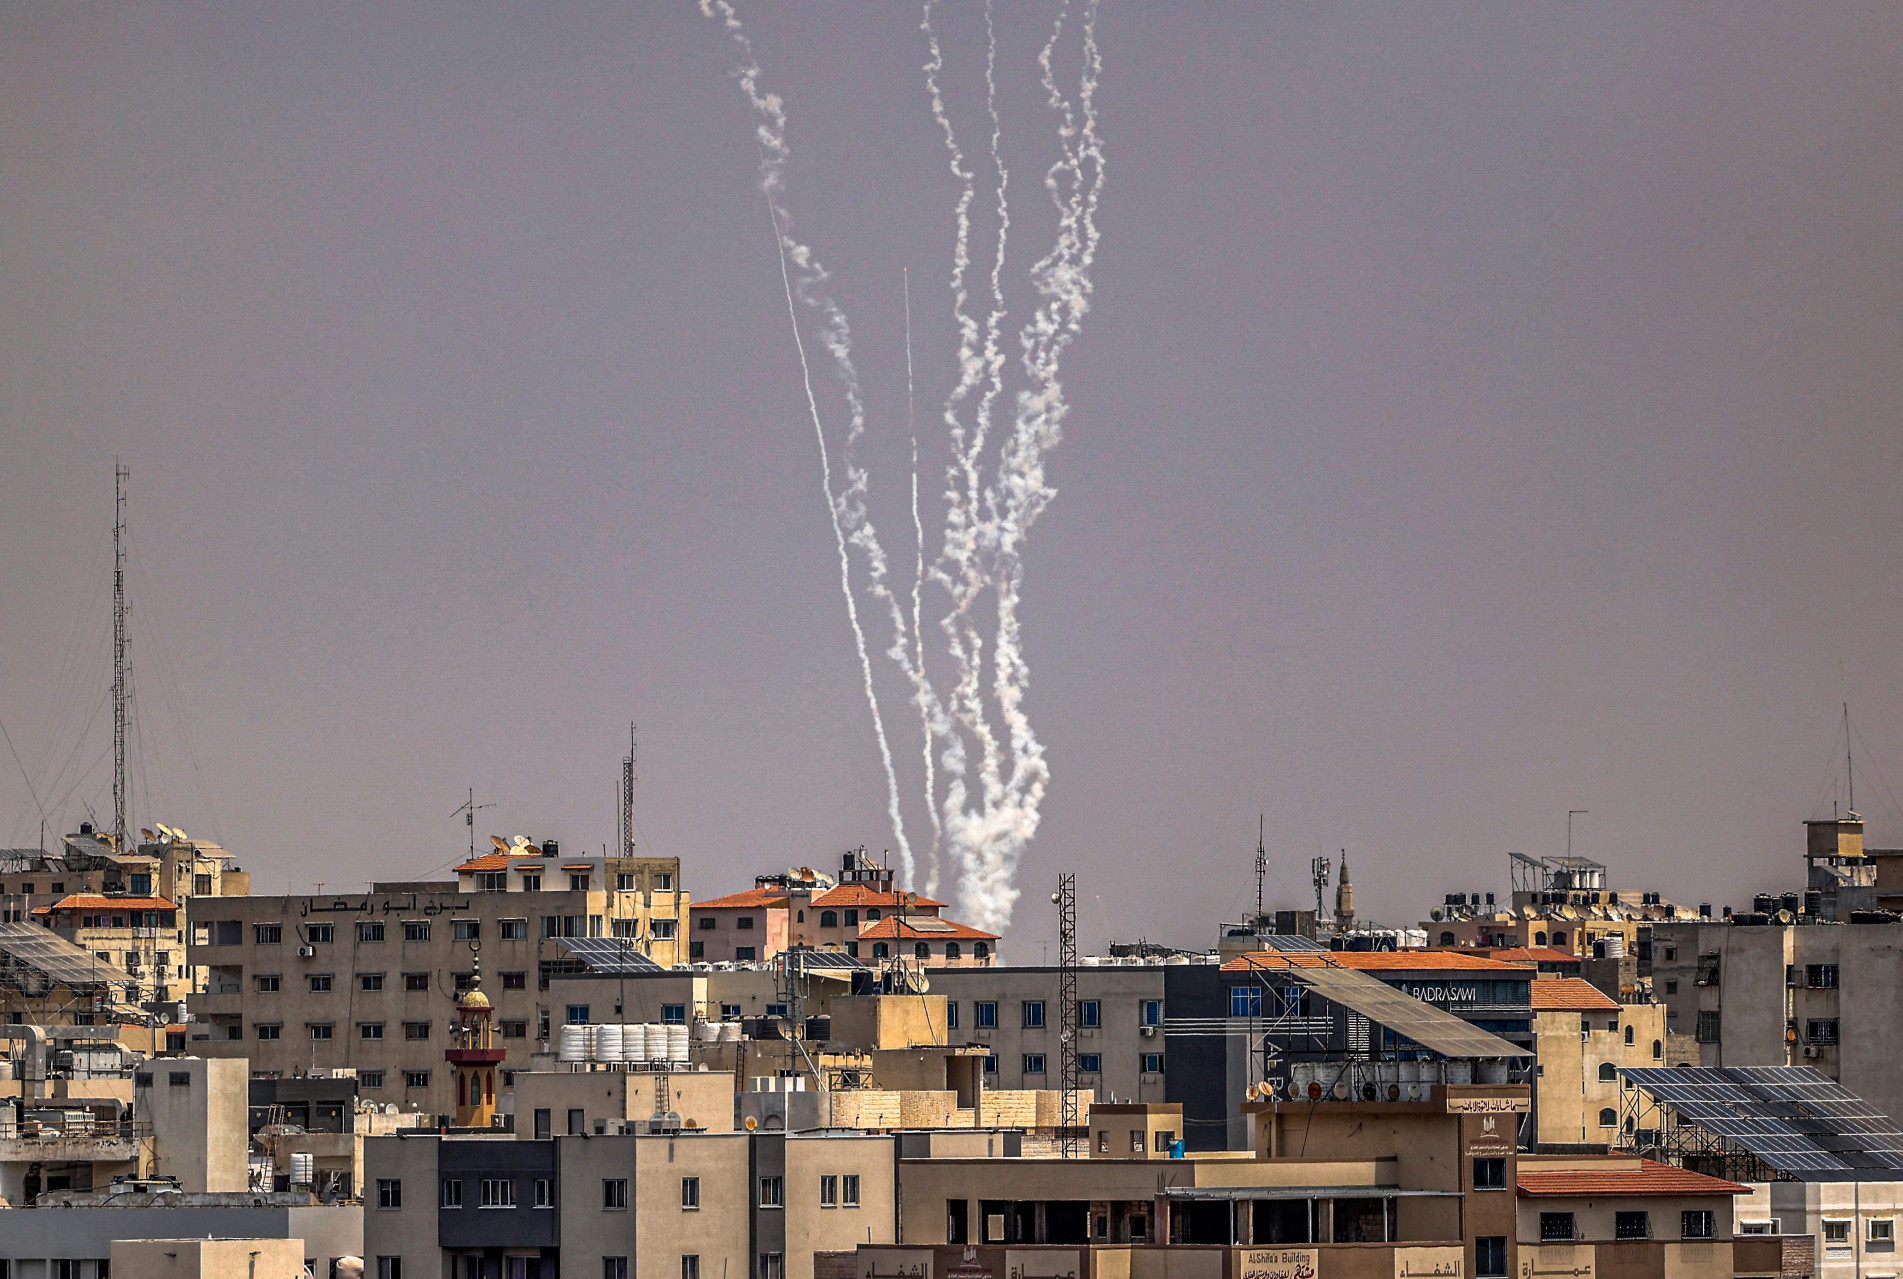  Rockets are fired from Gaza City on August 6, 2022 in the aftermath of Israeli aerial bombardment. Israel hit Gaza with air strikes and the Palestinian Islamic Jihad militant group retaliated with a barrage of rocket fire, in the territory's worst escalation of violence since a war last year. Israel has said it was forced to launch a 